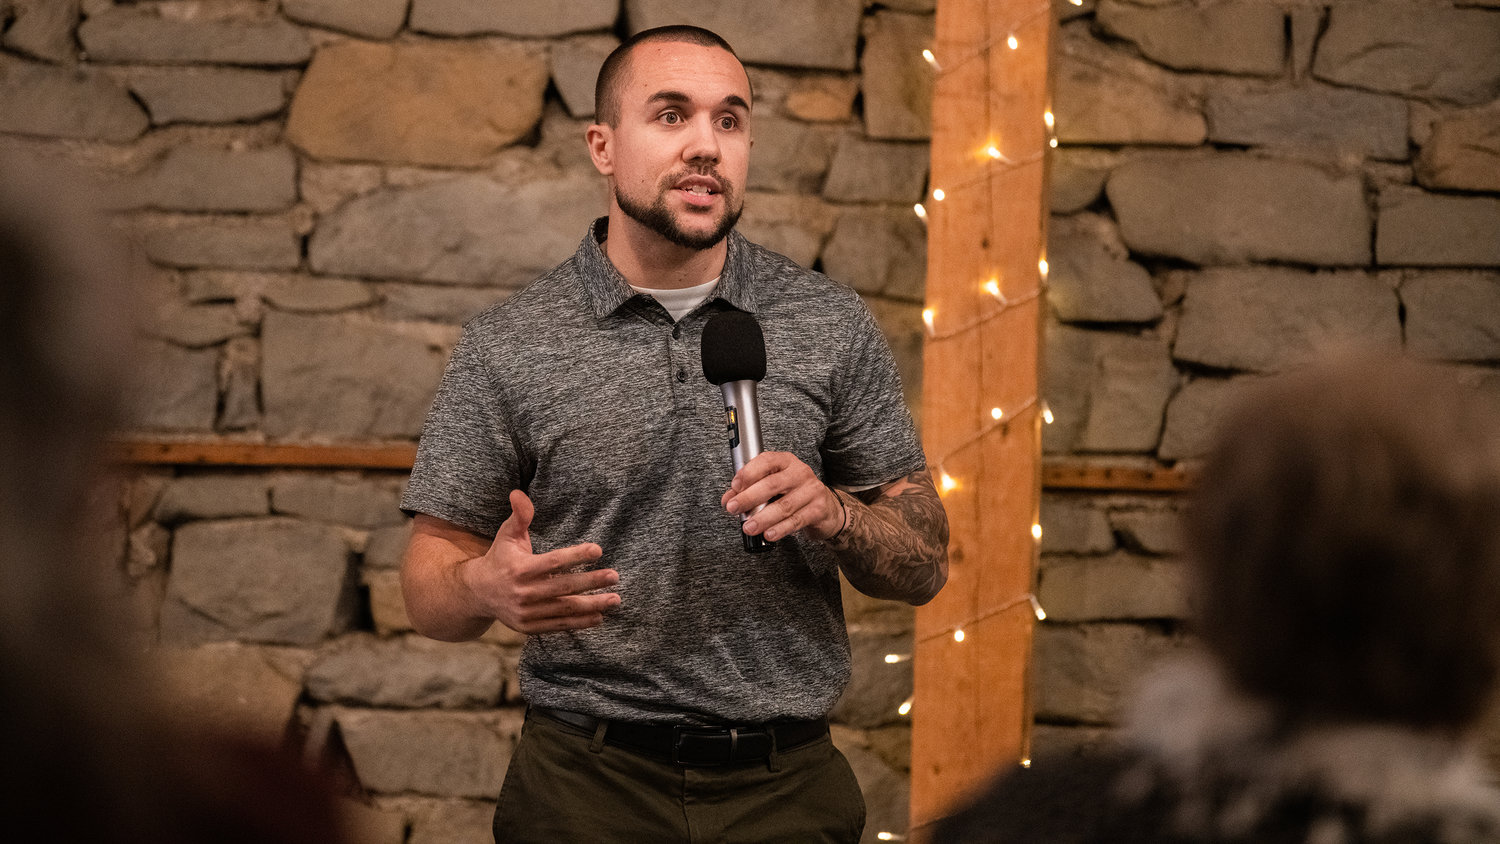 Derek Sanders speaks during the 2022 candidates forum hosted by the Tenino Area Chamber of Commerce in October at The Kodiak Room.